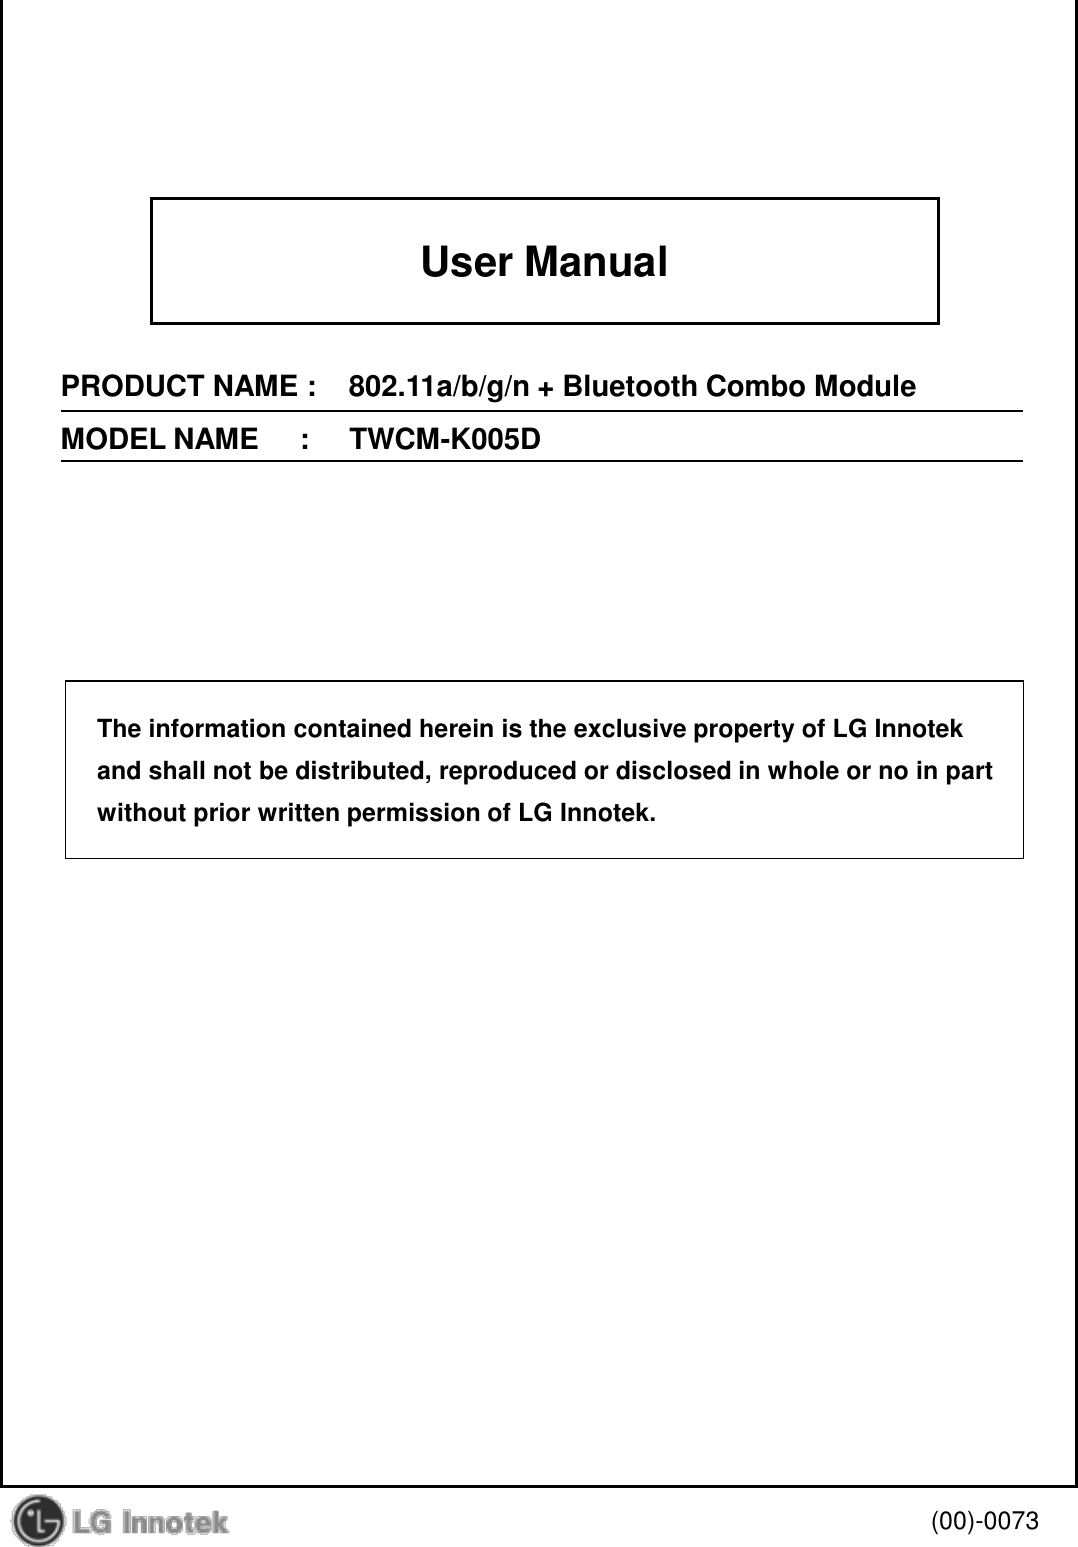 User ManualPRODUCT NAME :    802.11a/b/g/n + Bluetooth Combo ModuleMODEL NAME     :     TWCM-K005D(00)-0073The information contained herein is the exclusive property of LG Innotekand shall not be distributed, reproduced or disclosed in whole or no in partwithout prior written permission of LG Innotek.